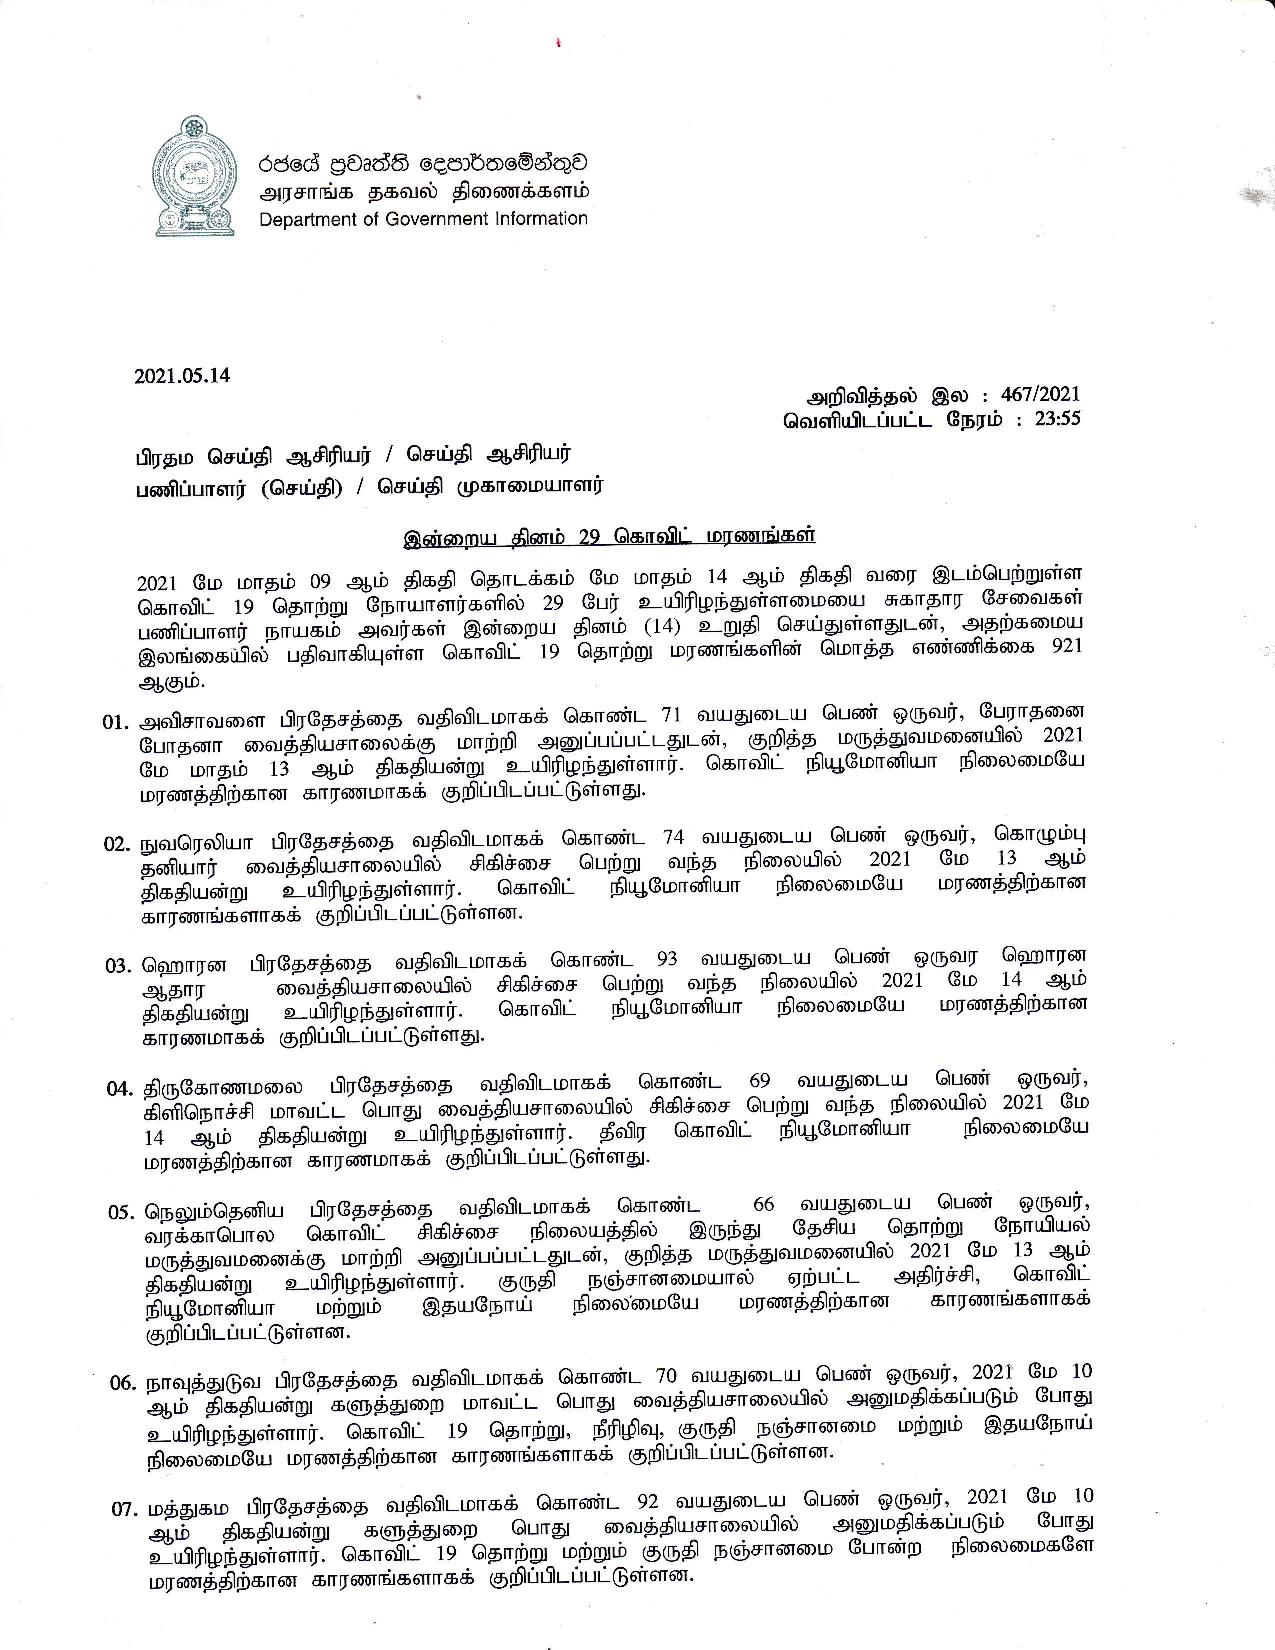 Release No 467 Tamil page 001